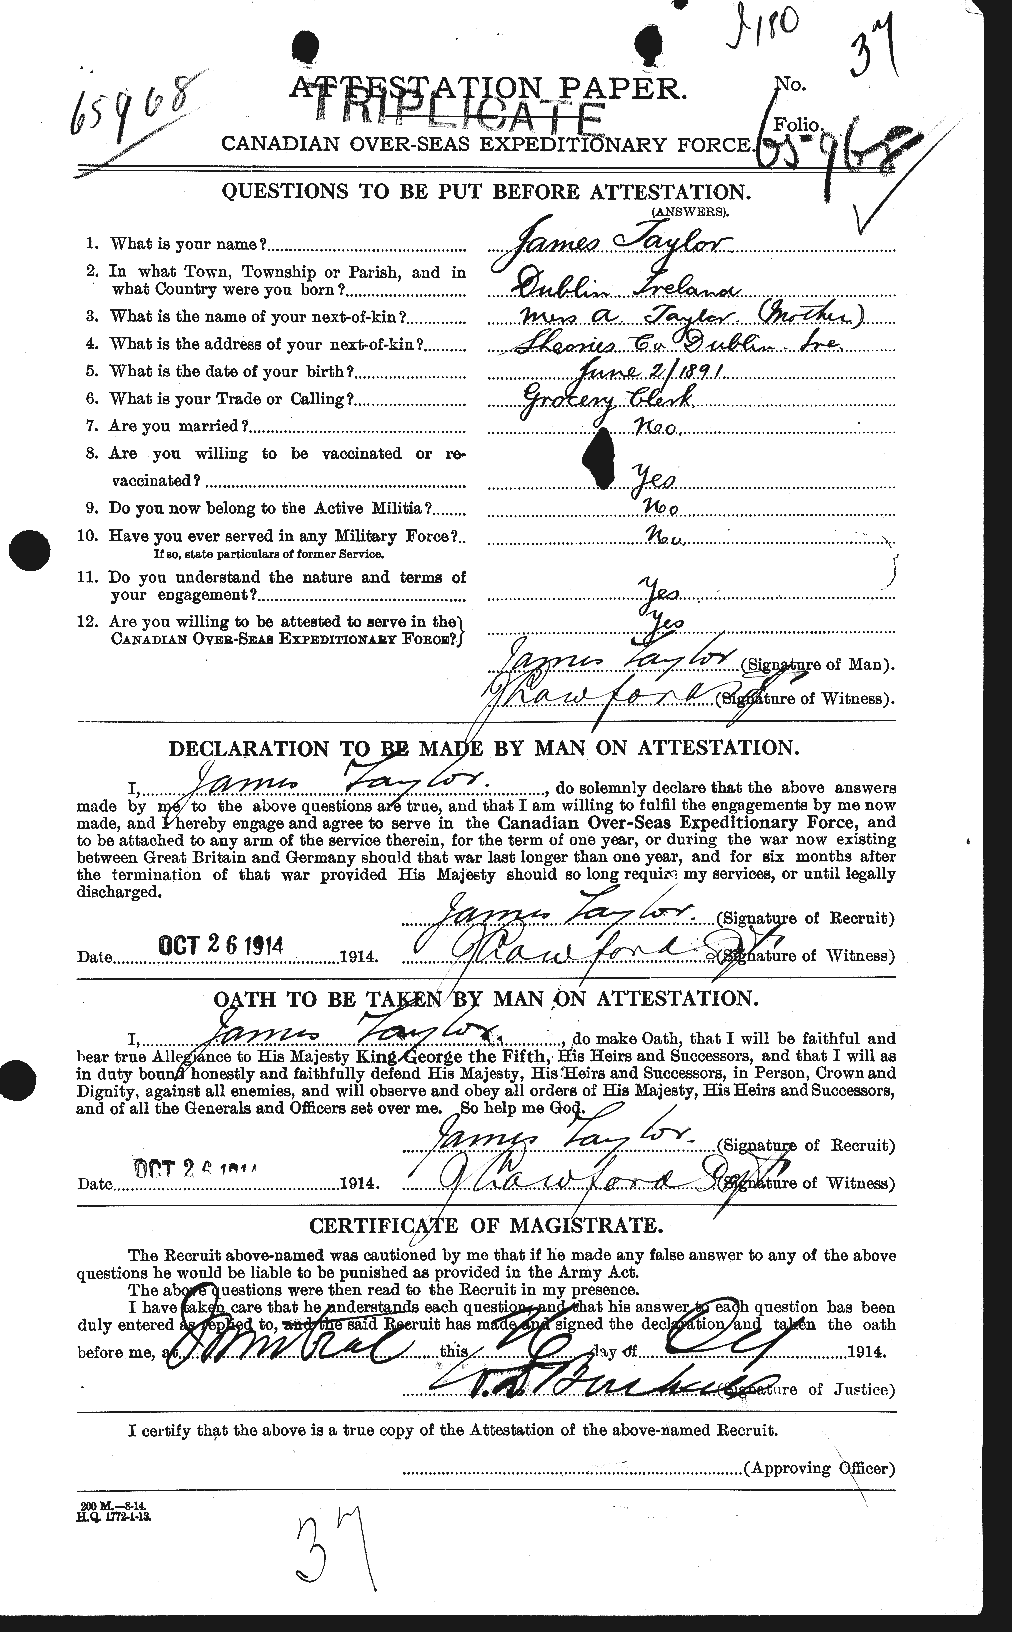 Personnel Records of the First World War - CEF 626670a